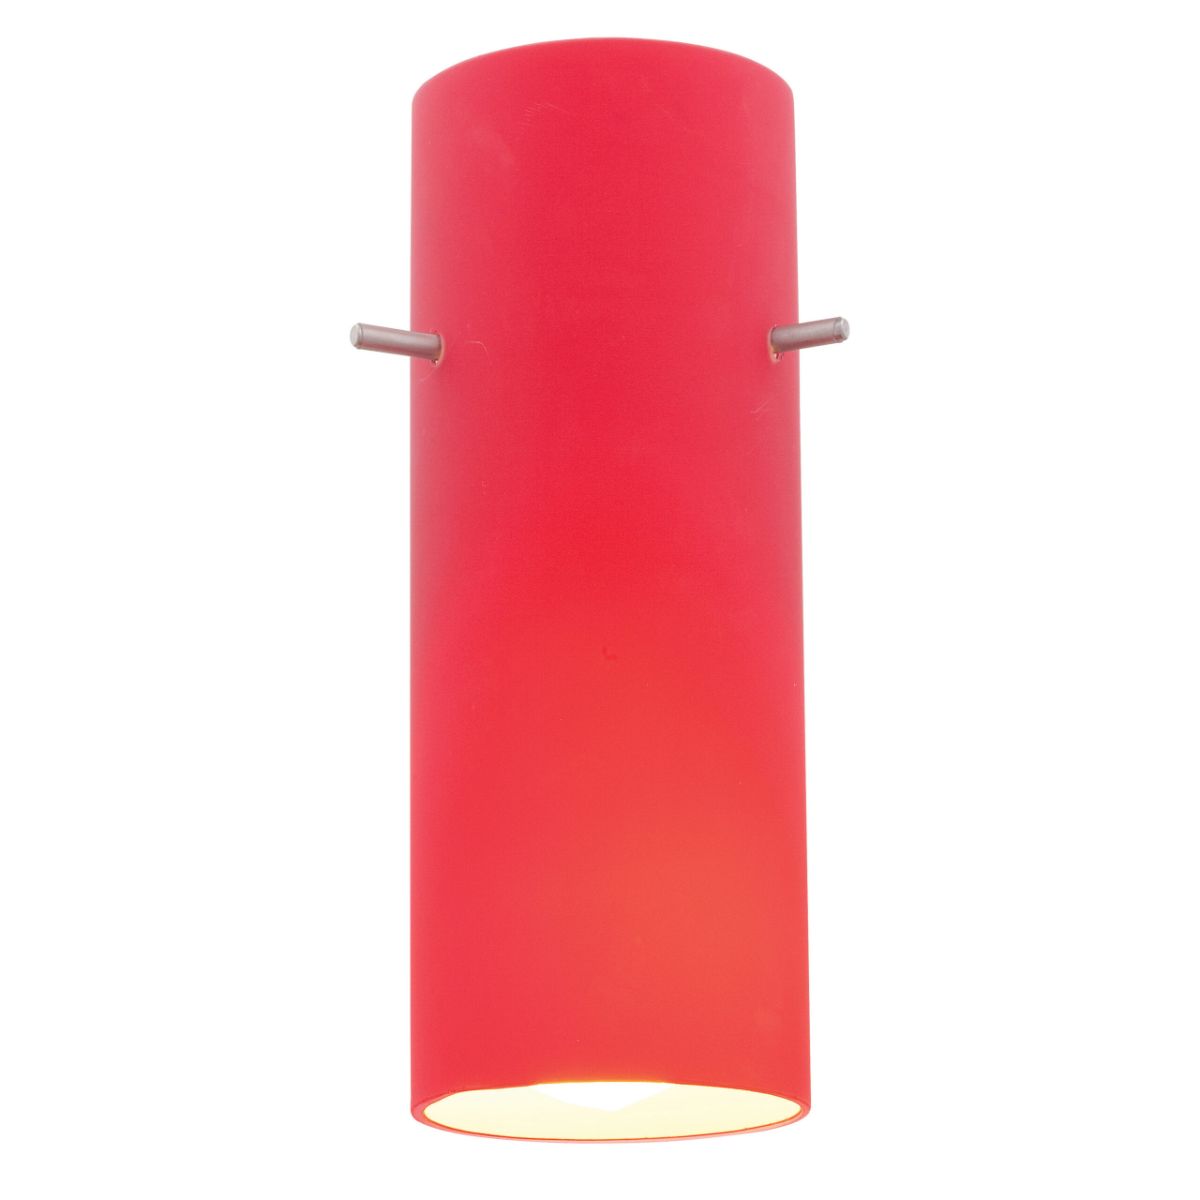 Cylinder 10 in. Red Glass Pendant Shade with 4 in. Fitter